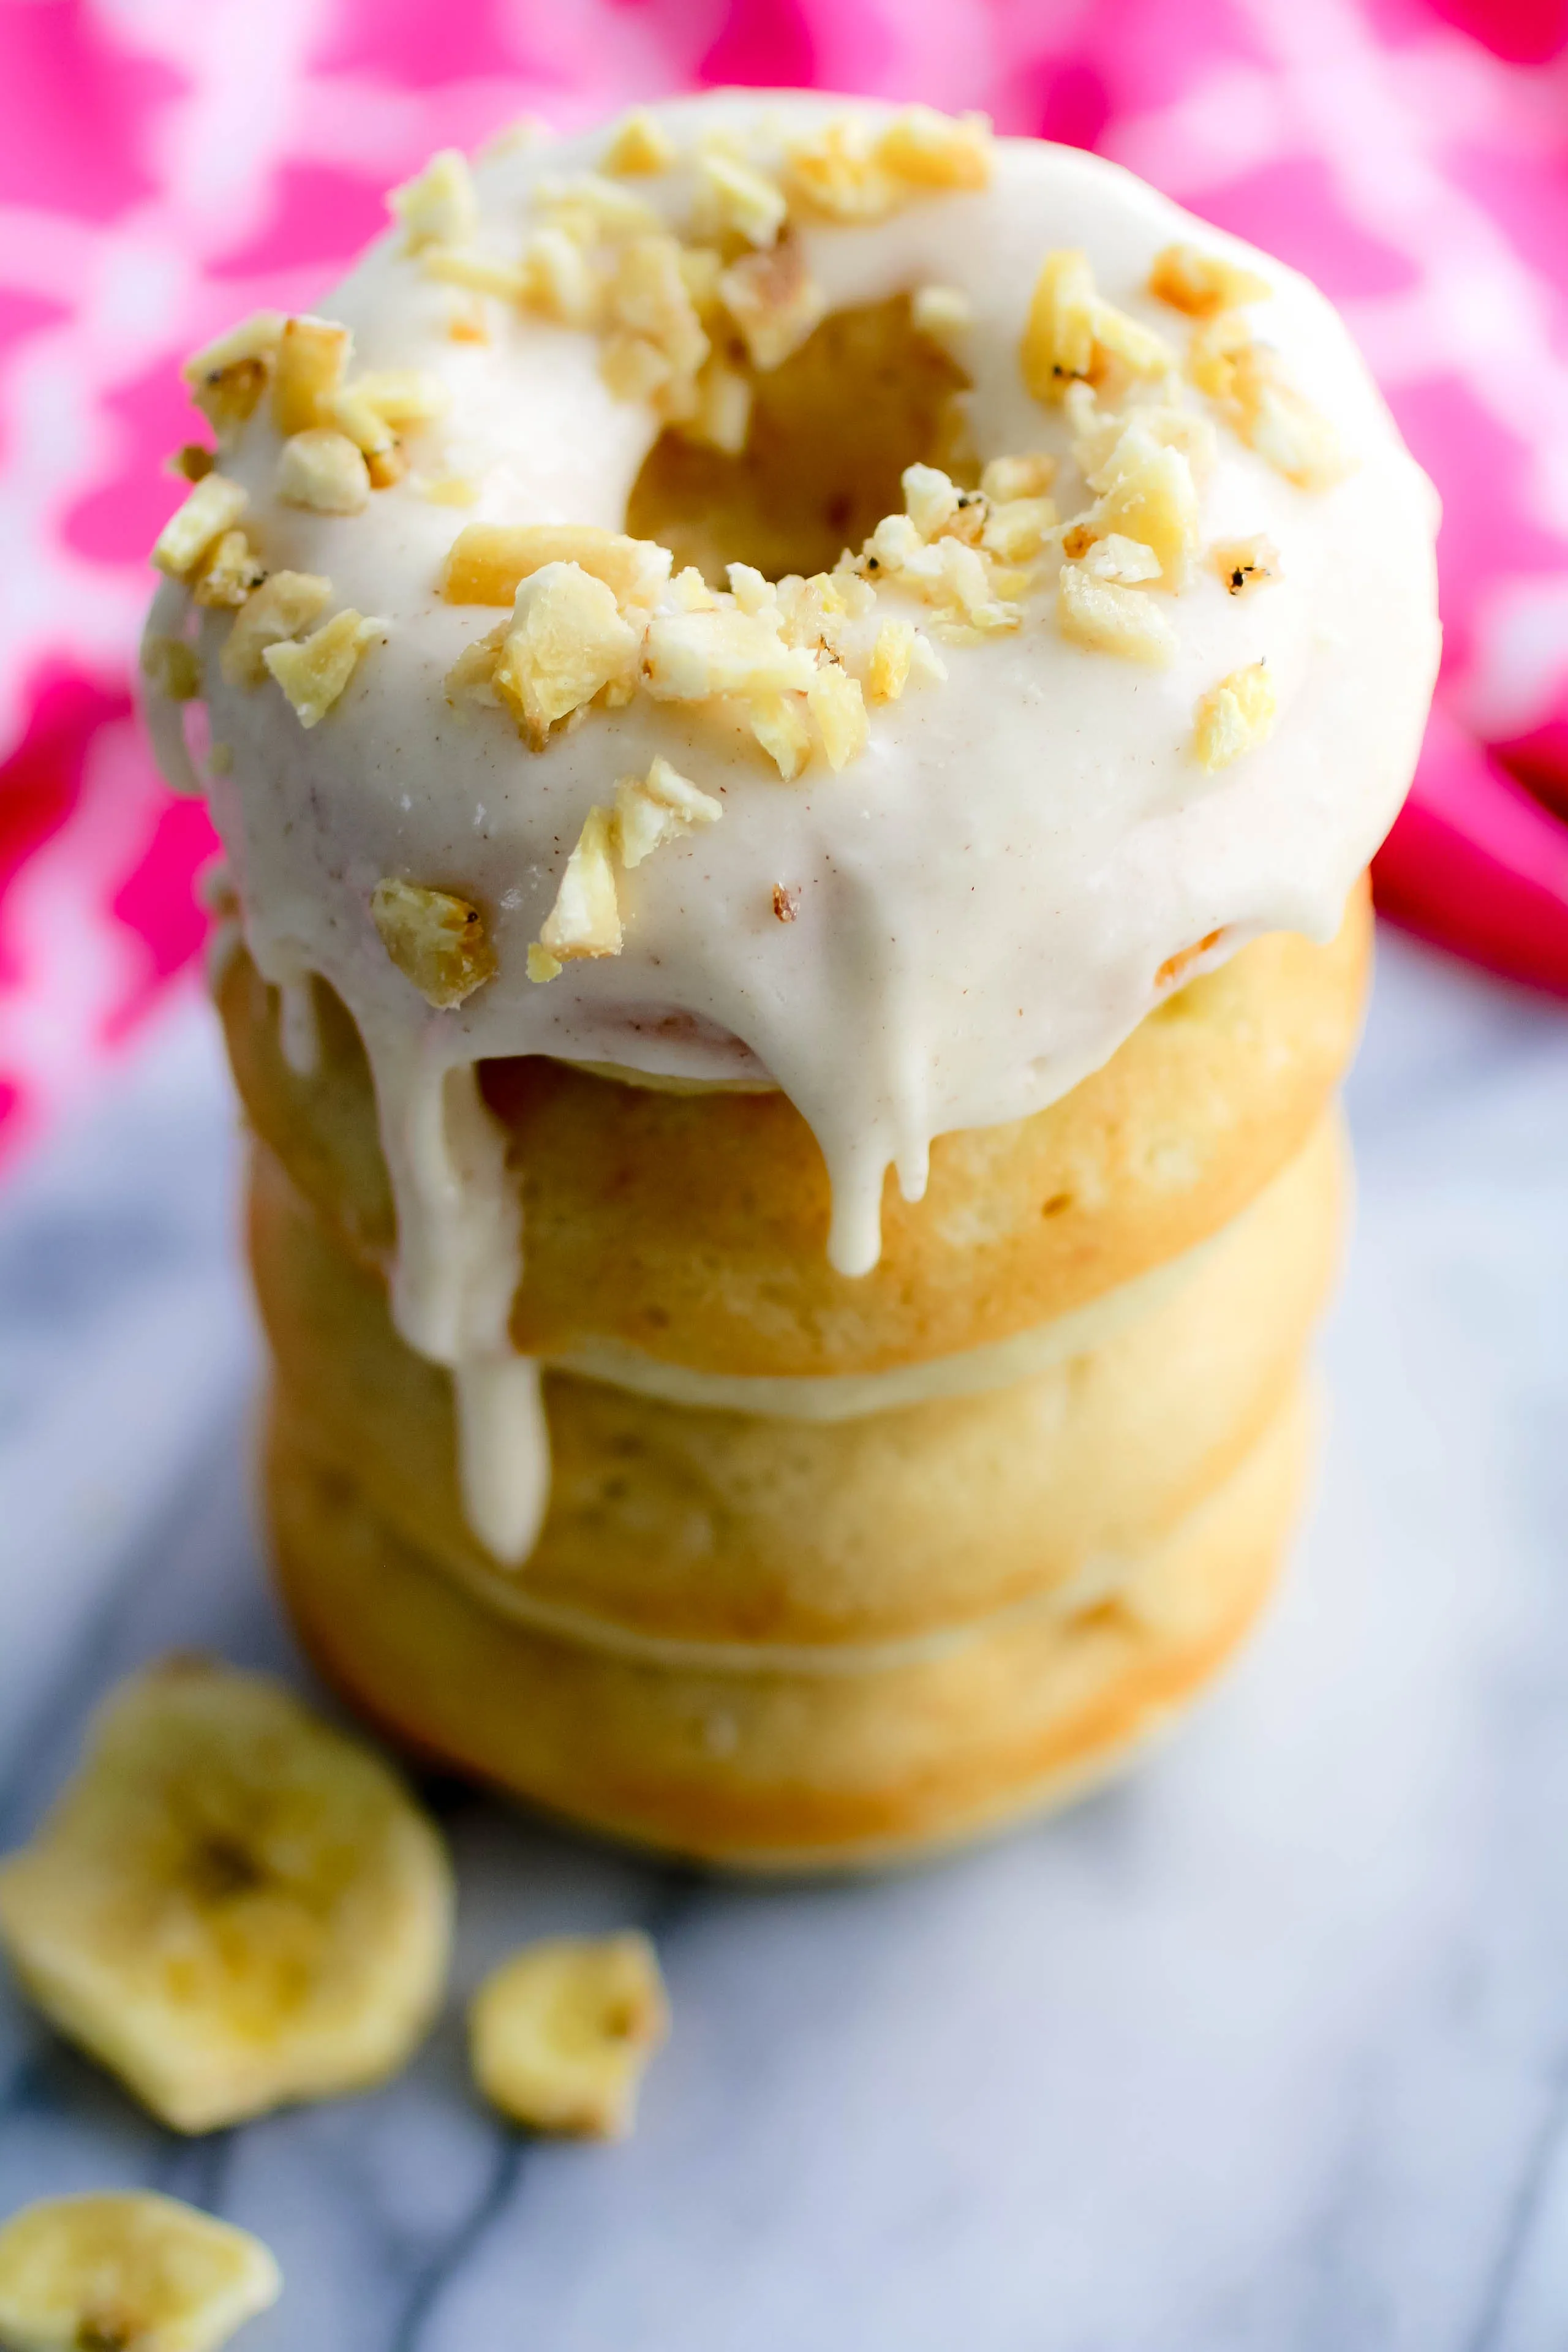 Baked Banana Donuts with Cinnamon Cream Cheese Frosting are a delight, and you can use up your overripe bananas to make them!